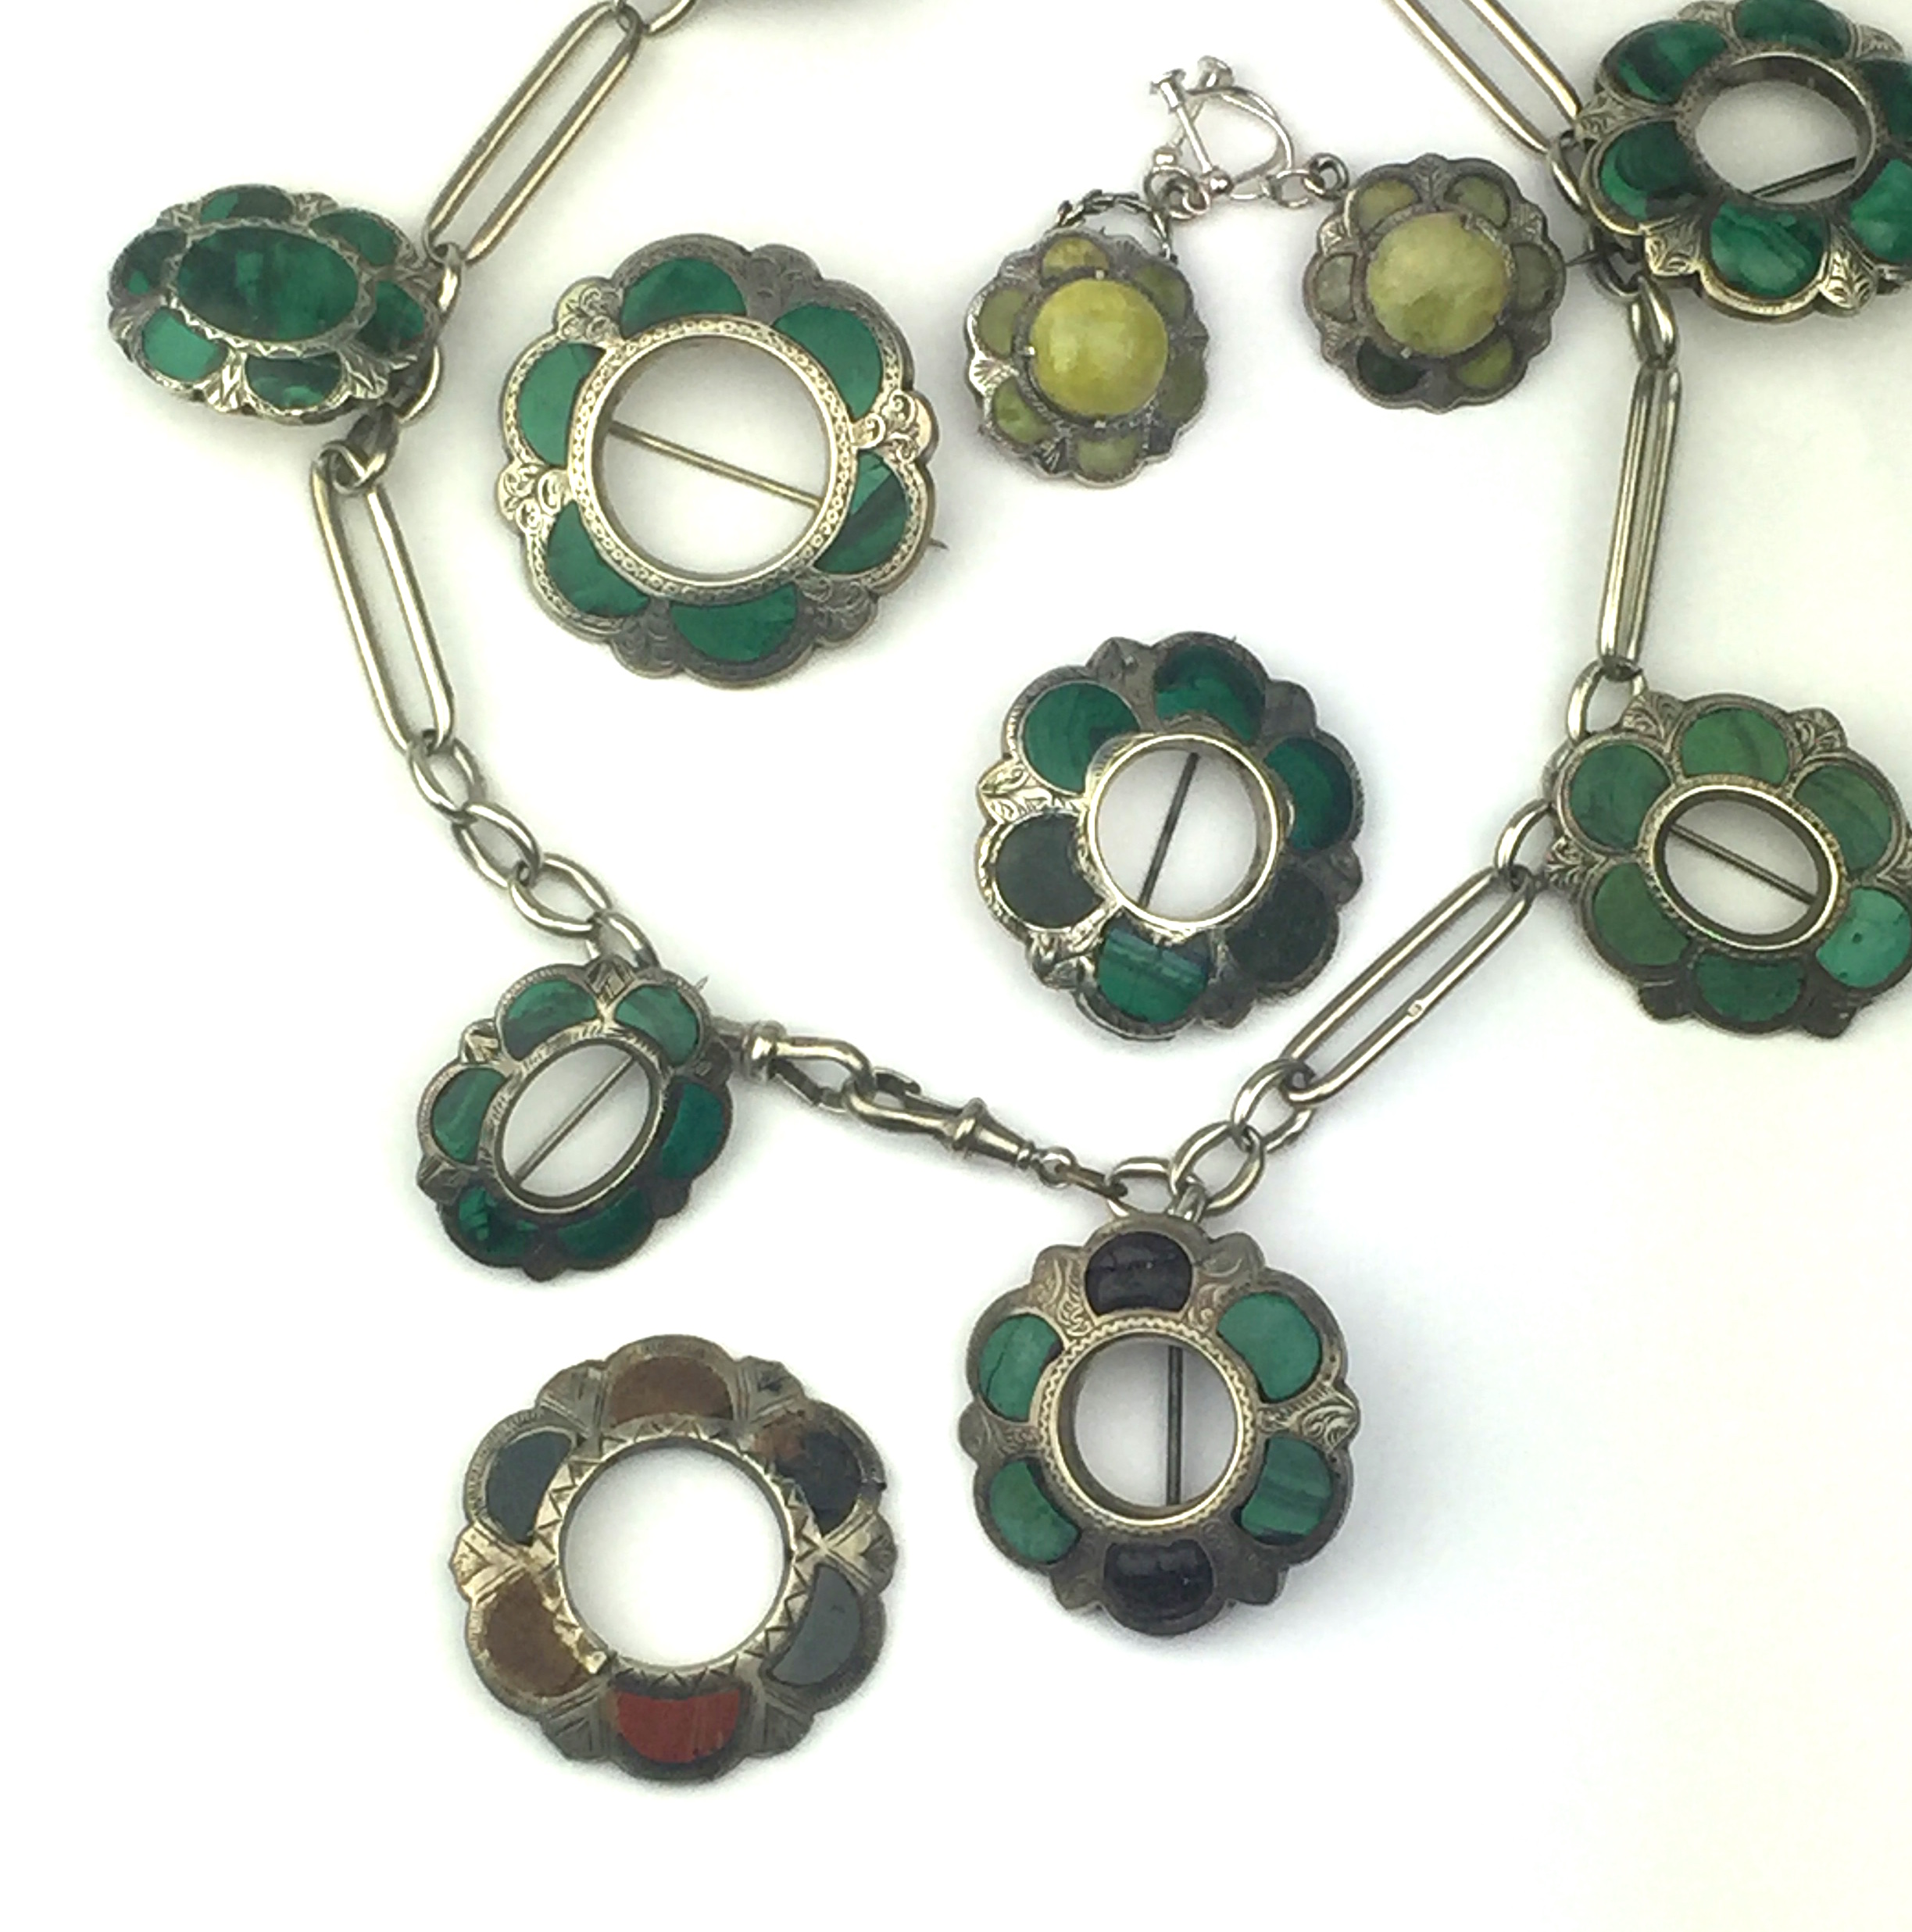 A malachite necklace set in sterling silver,